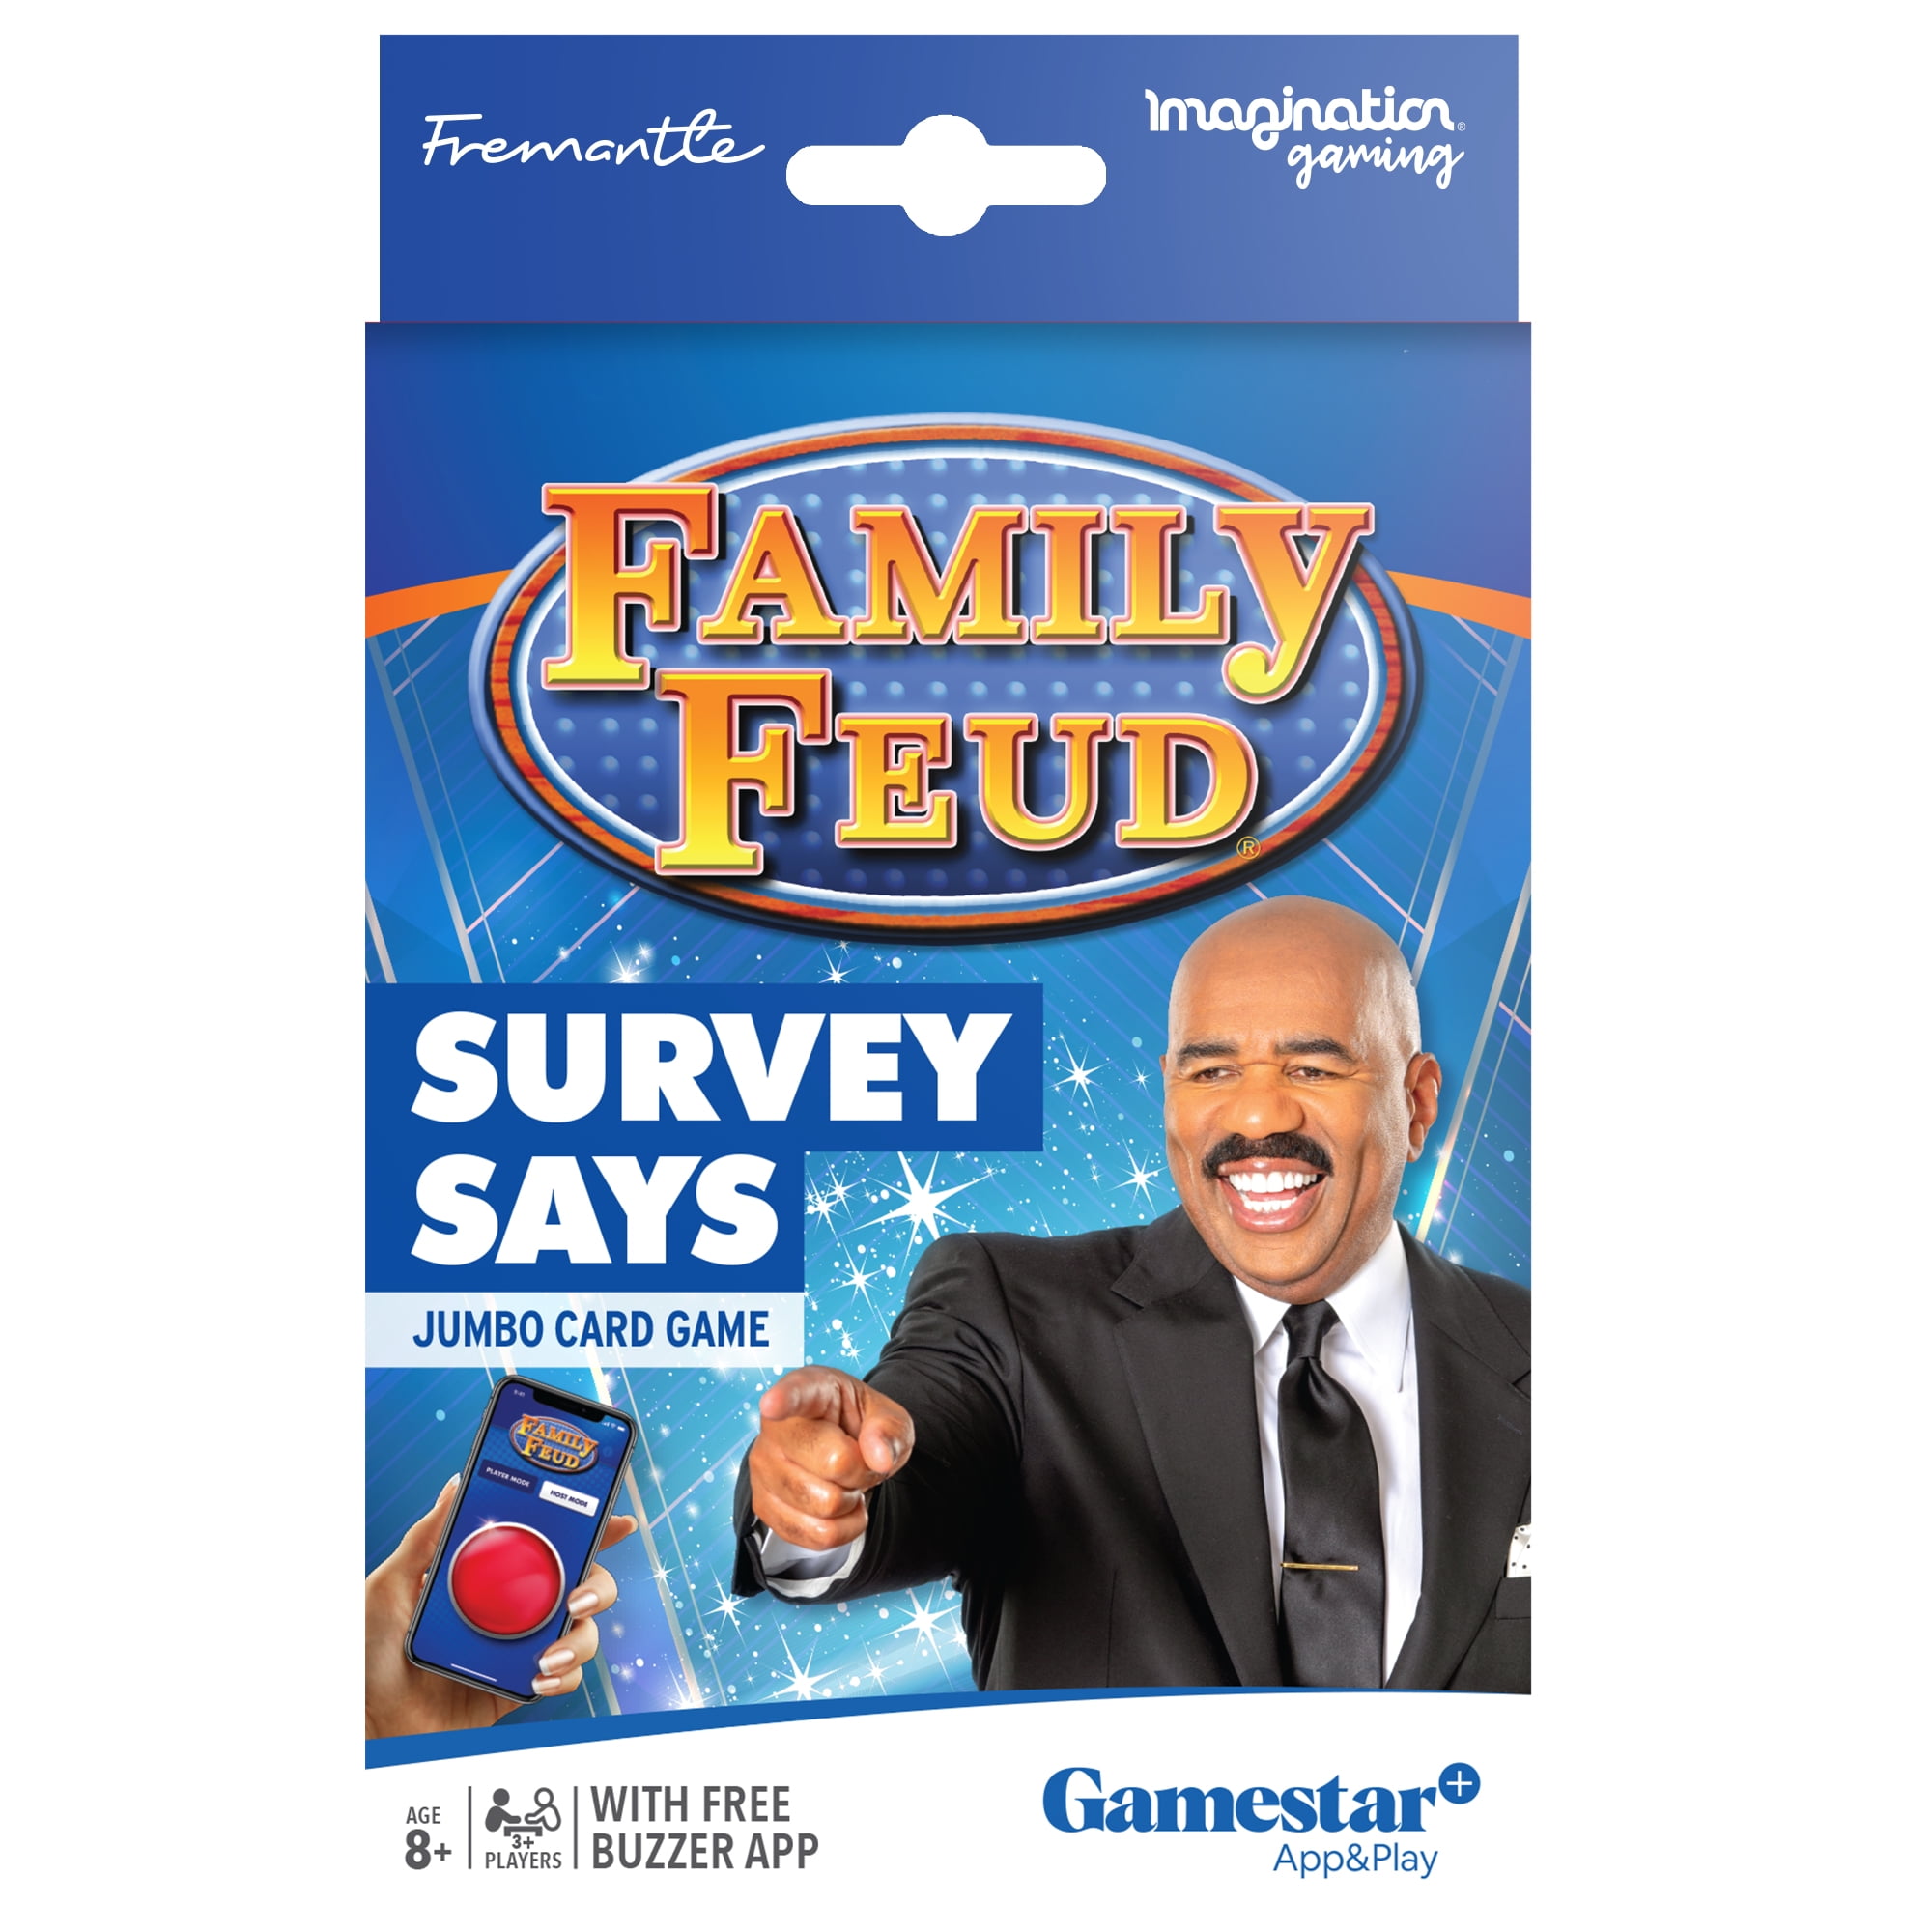 Family Feud Survey Says! - Jumbo Card Game New